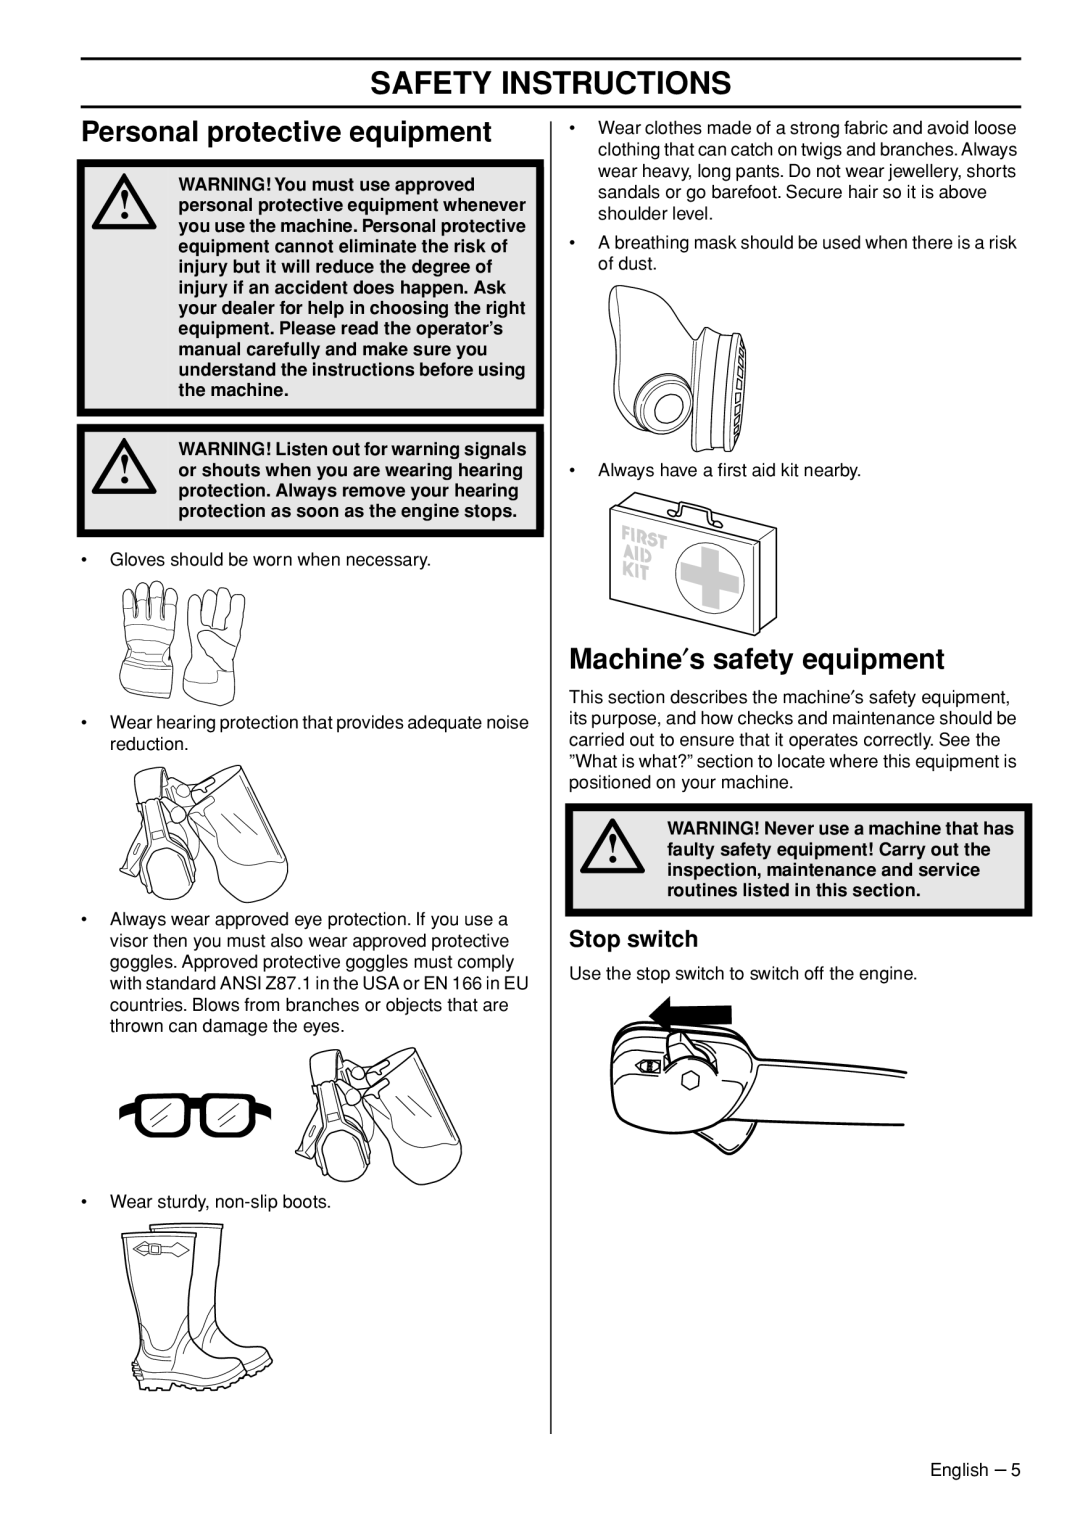 Husqvarna 1153191-26 manual Safety Instructions, Personal protective equipment, Machine′s safety equipment, Stop switch 